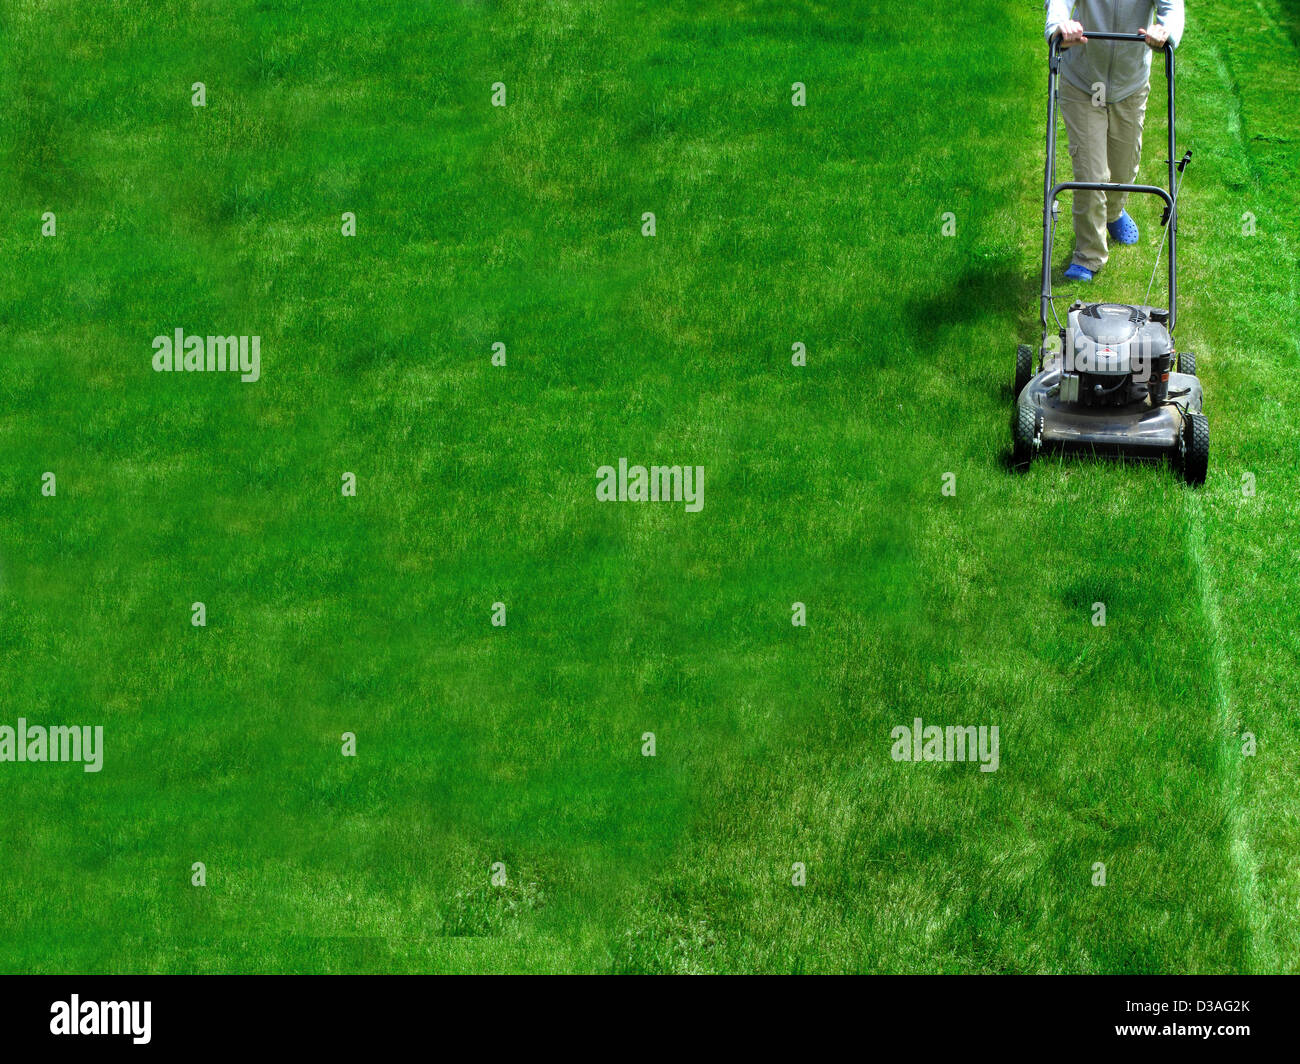 Young Girl Mowing green grass lawn with push mower Stock Photo